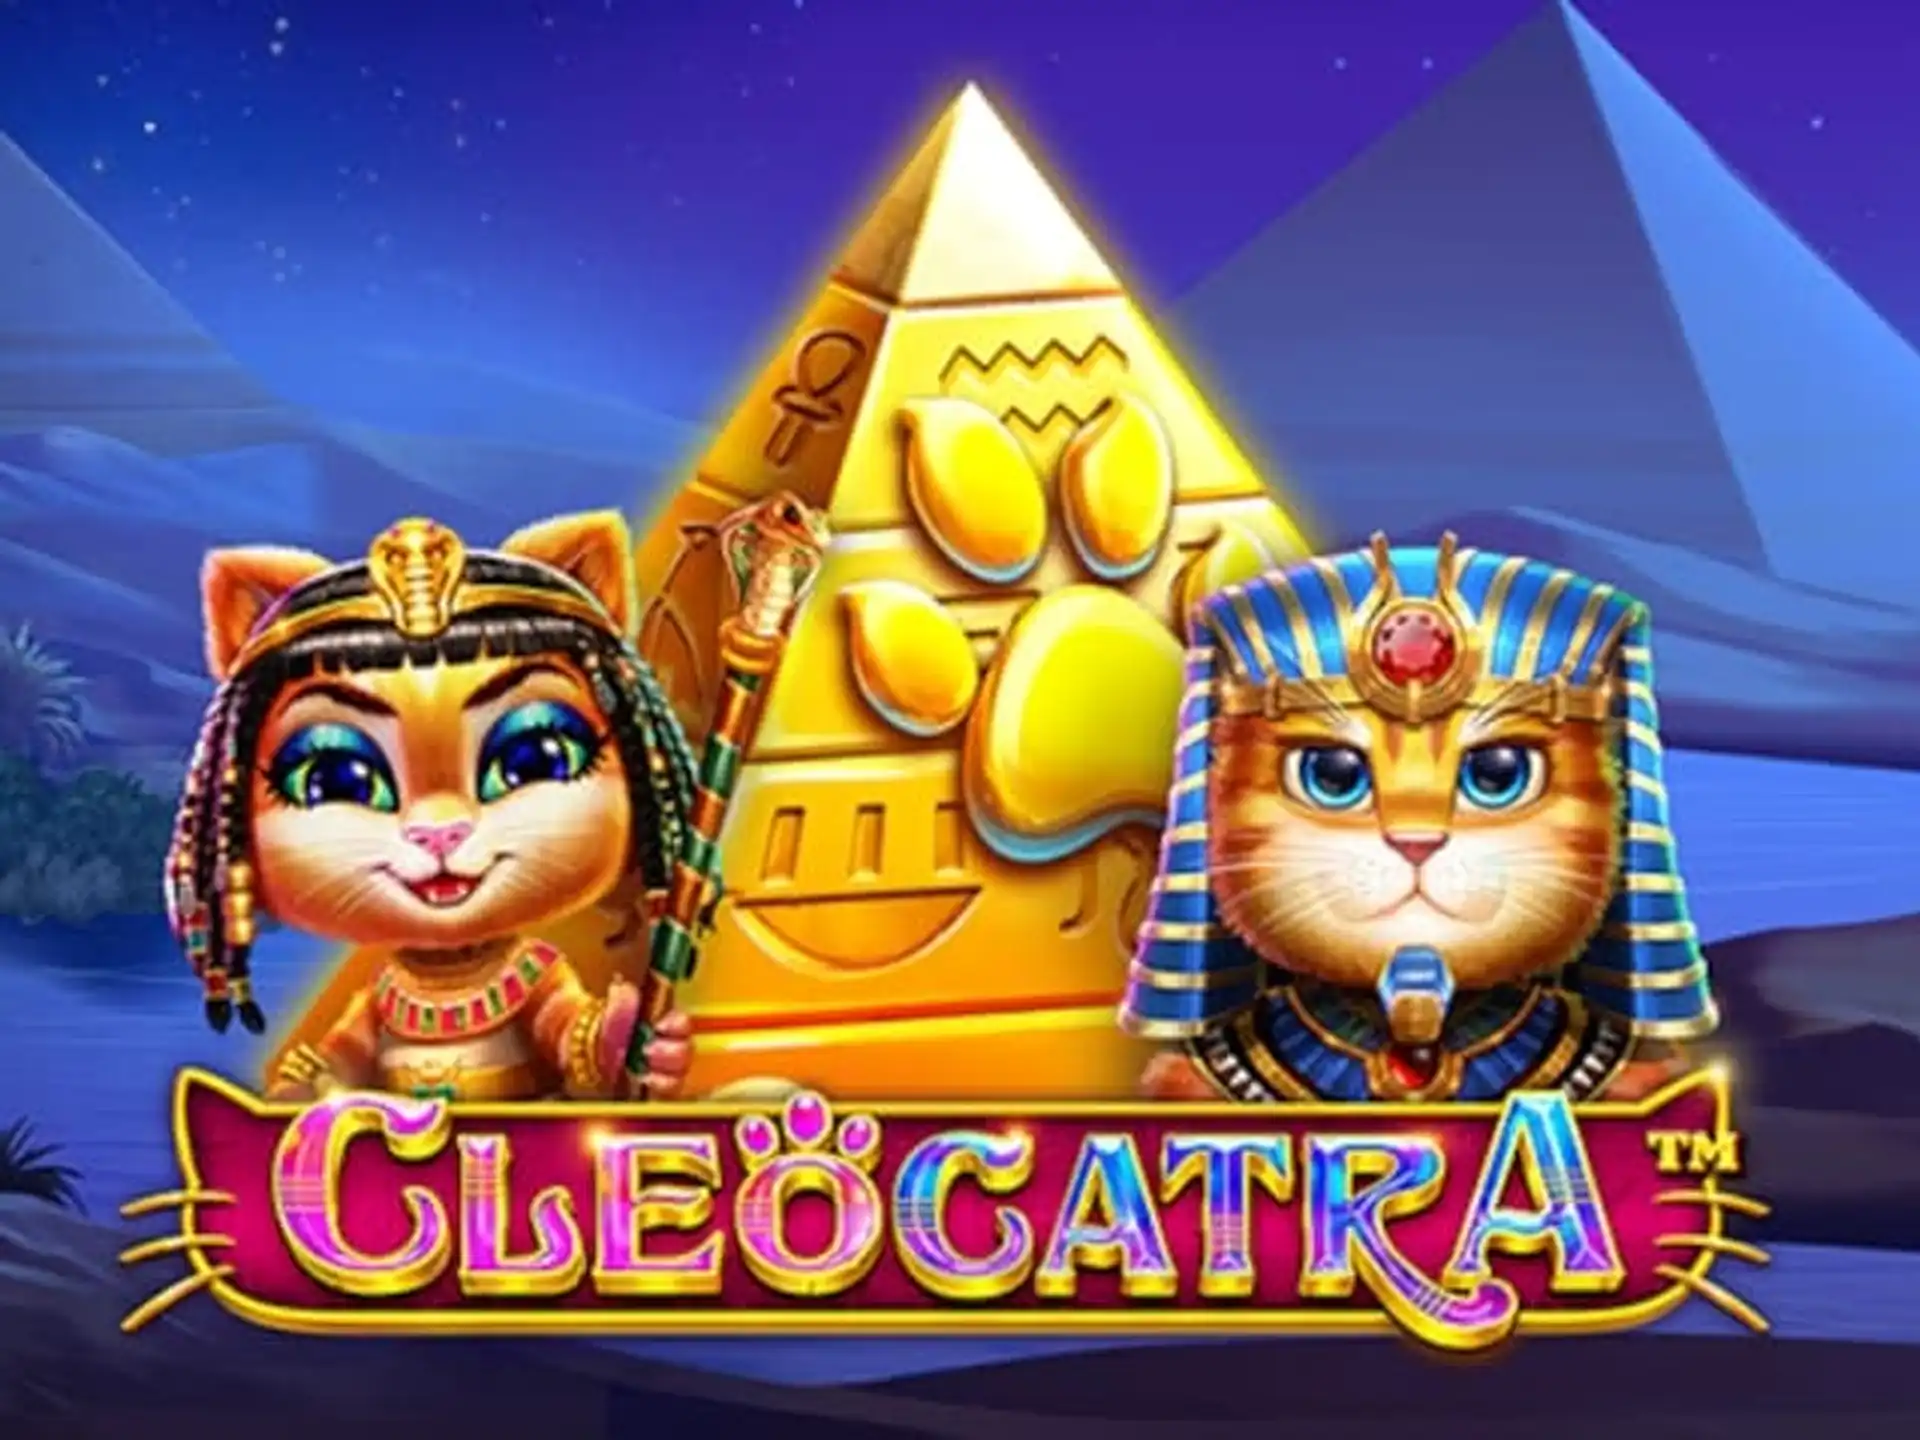 Have joyment playing and winning in Cleocatra slot.